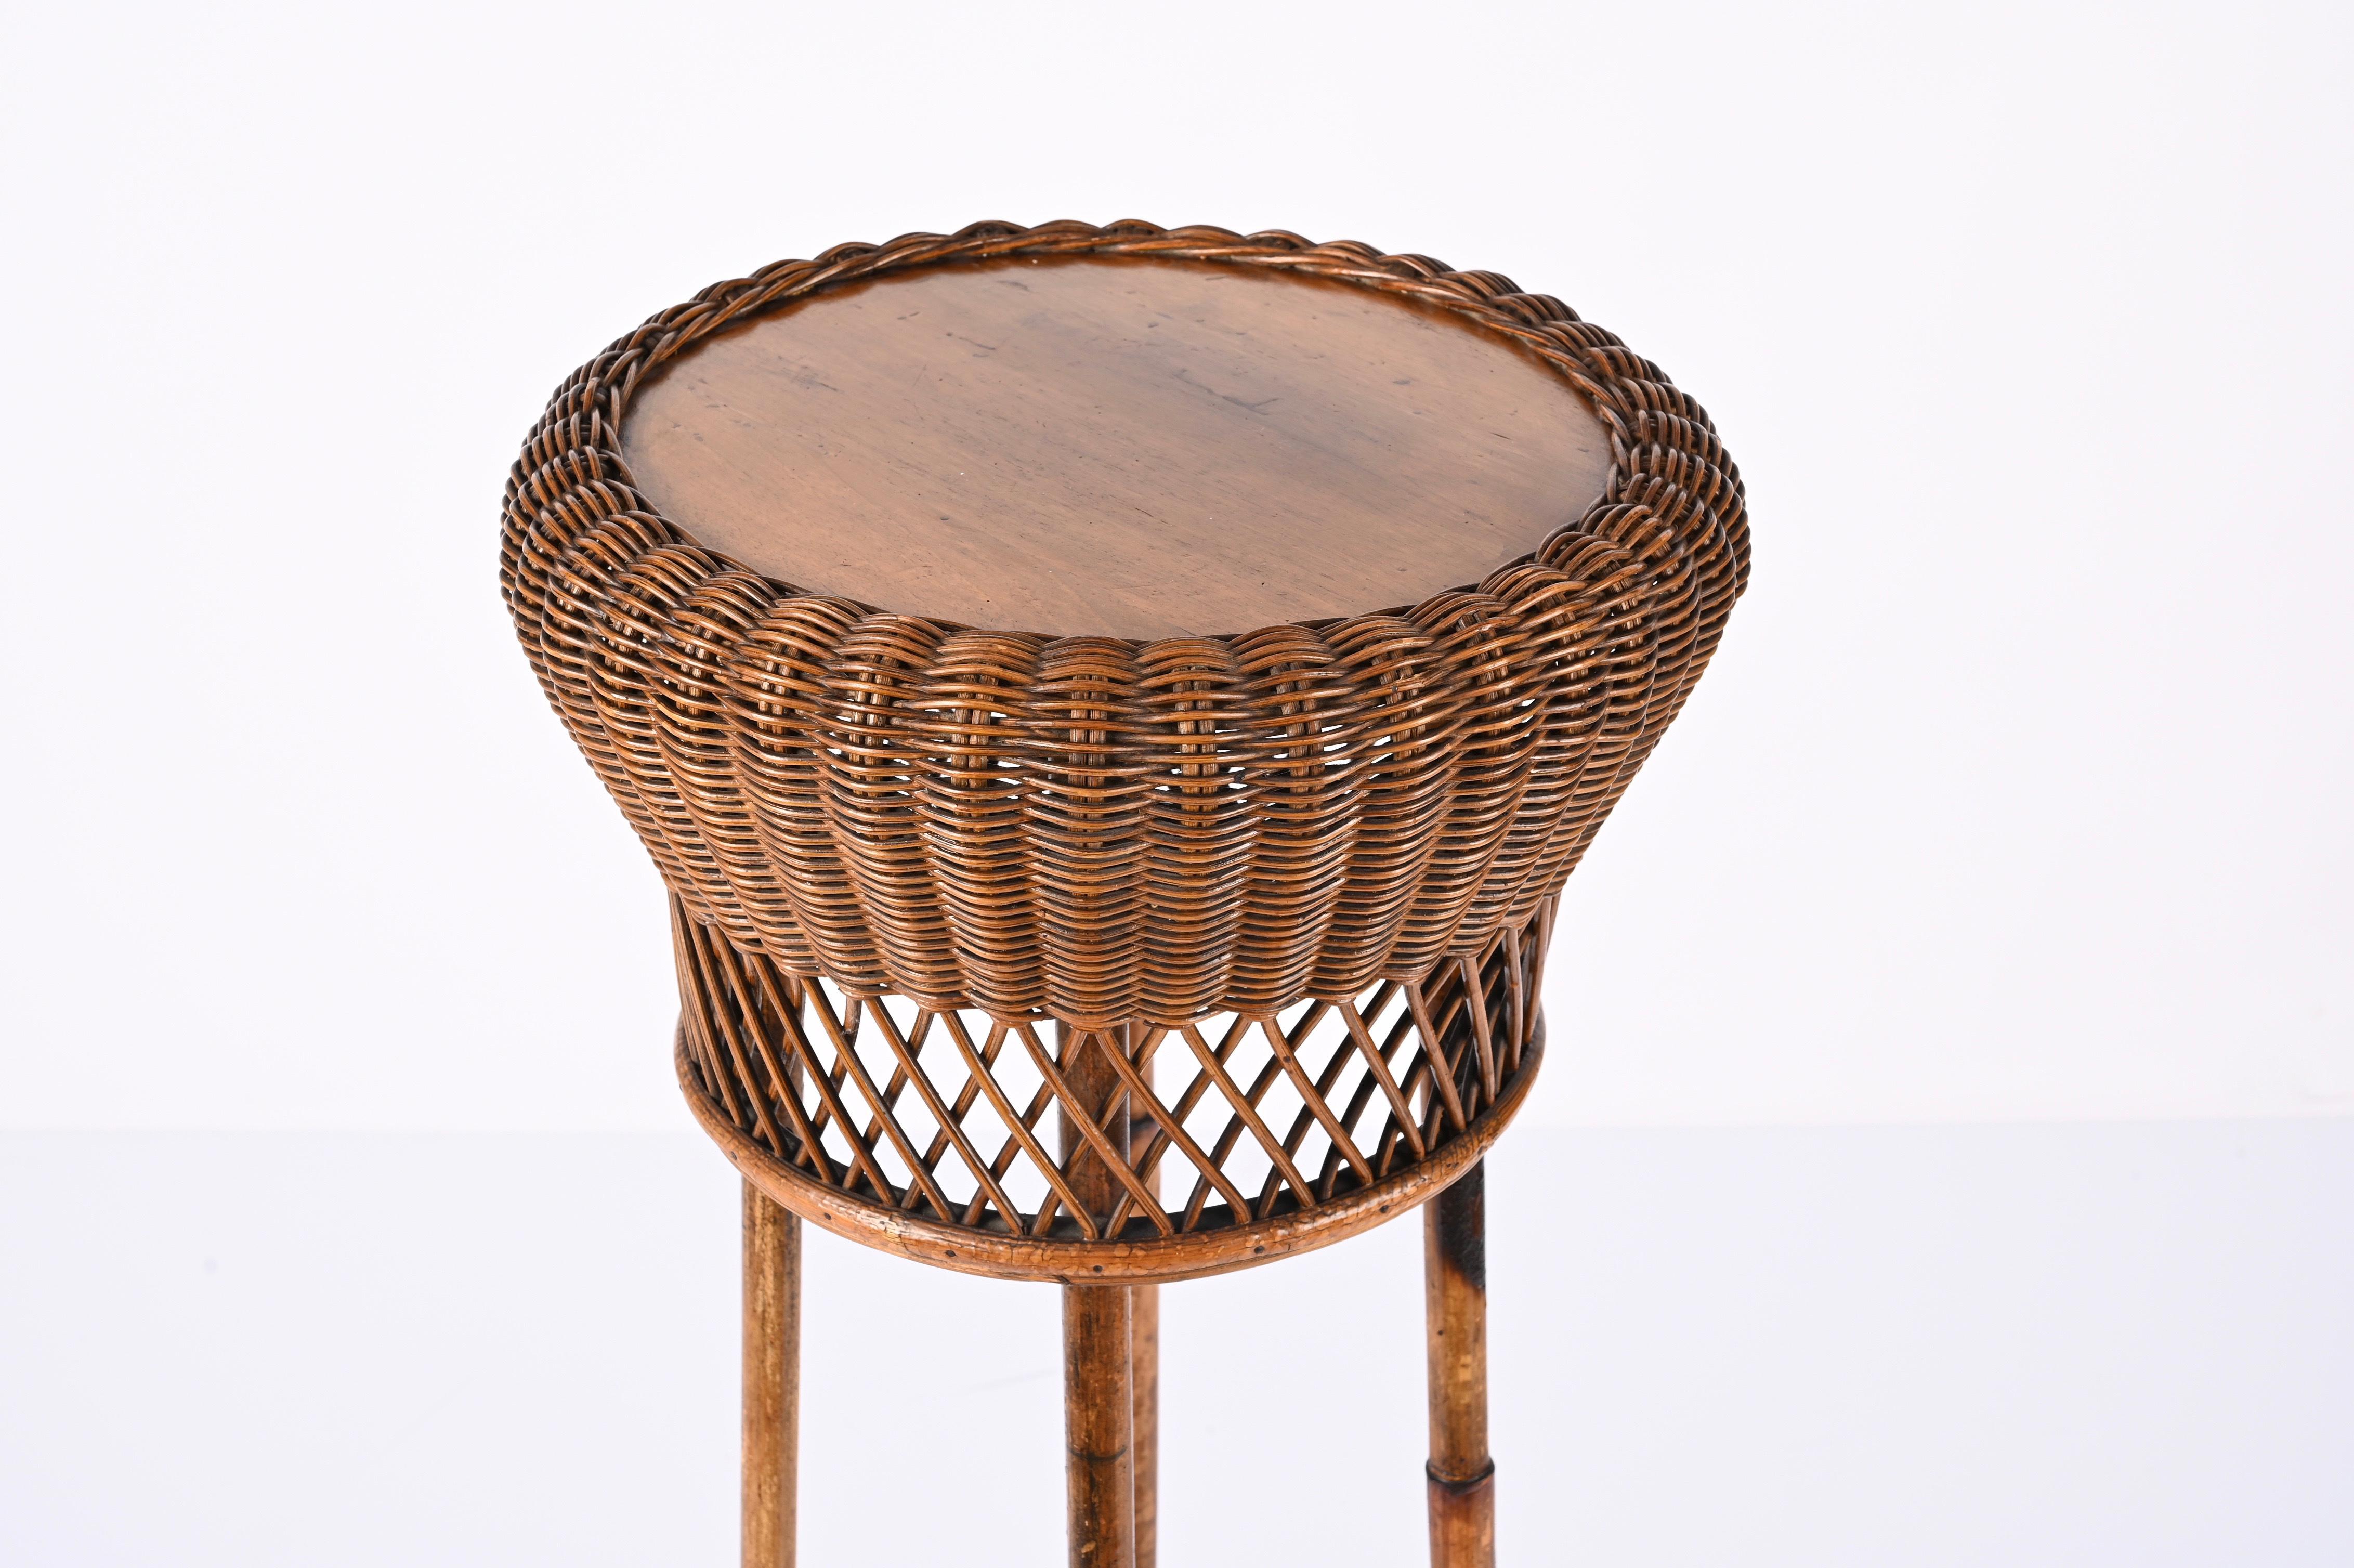 Midcentury Double-Levelled Circular Rattan and Bamboo Italian Pedestal, 1950s For Sale 7